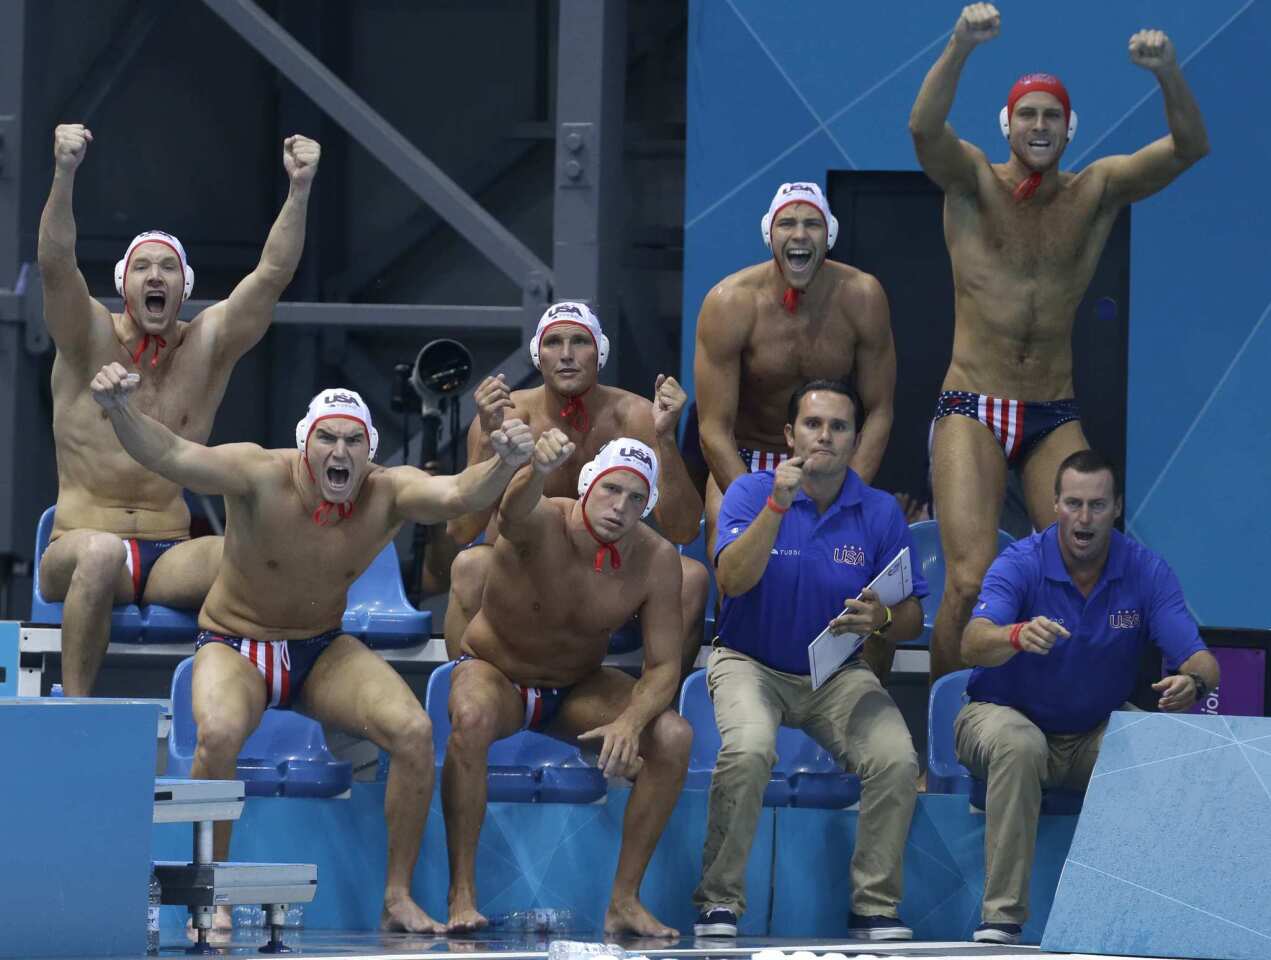 United States water polo bench celebrates a goal against Romania.